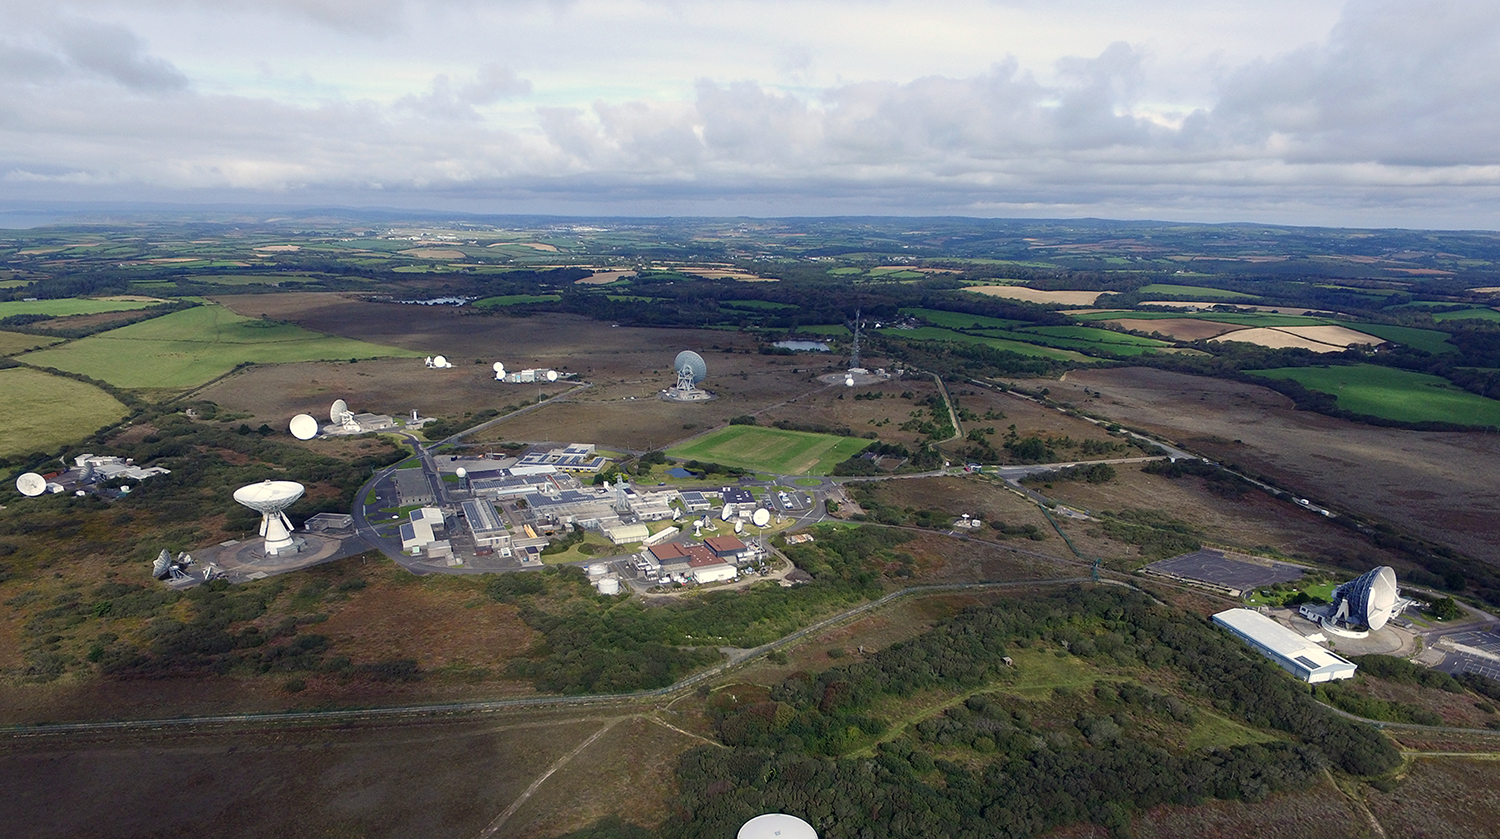 An aerial view of the Goonhilly Site shows a range of antennas communicating with LEO, MEO, and GEO satellites. Also shown are 3 dishes over 27m in diameter, the site's buildings and the surrounding natural area.